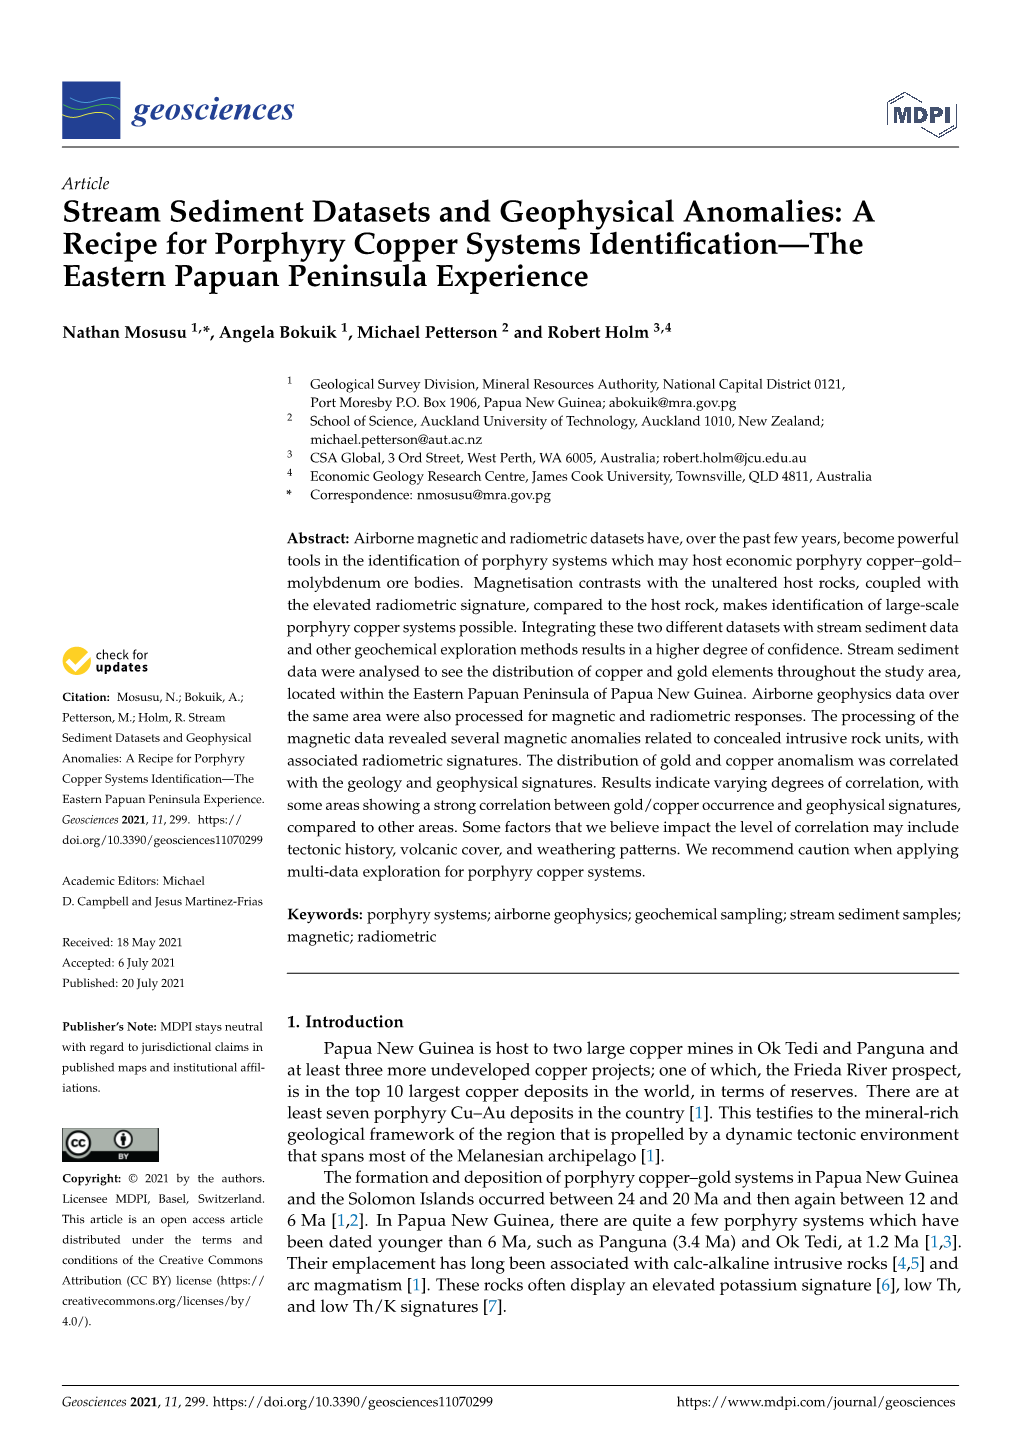 Stream Sediment Datasets and Geophysical Anomalies: a Recipe for Porphyry Copper Systems Identiﬁcation—The Eastern Papuan Peninsula Experience